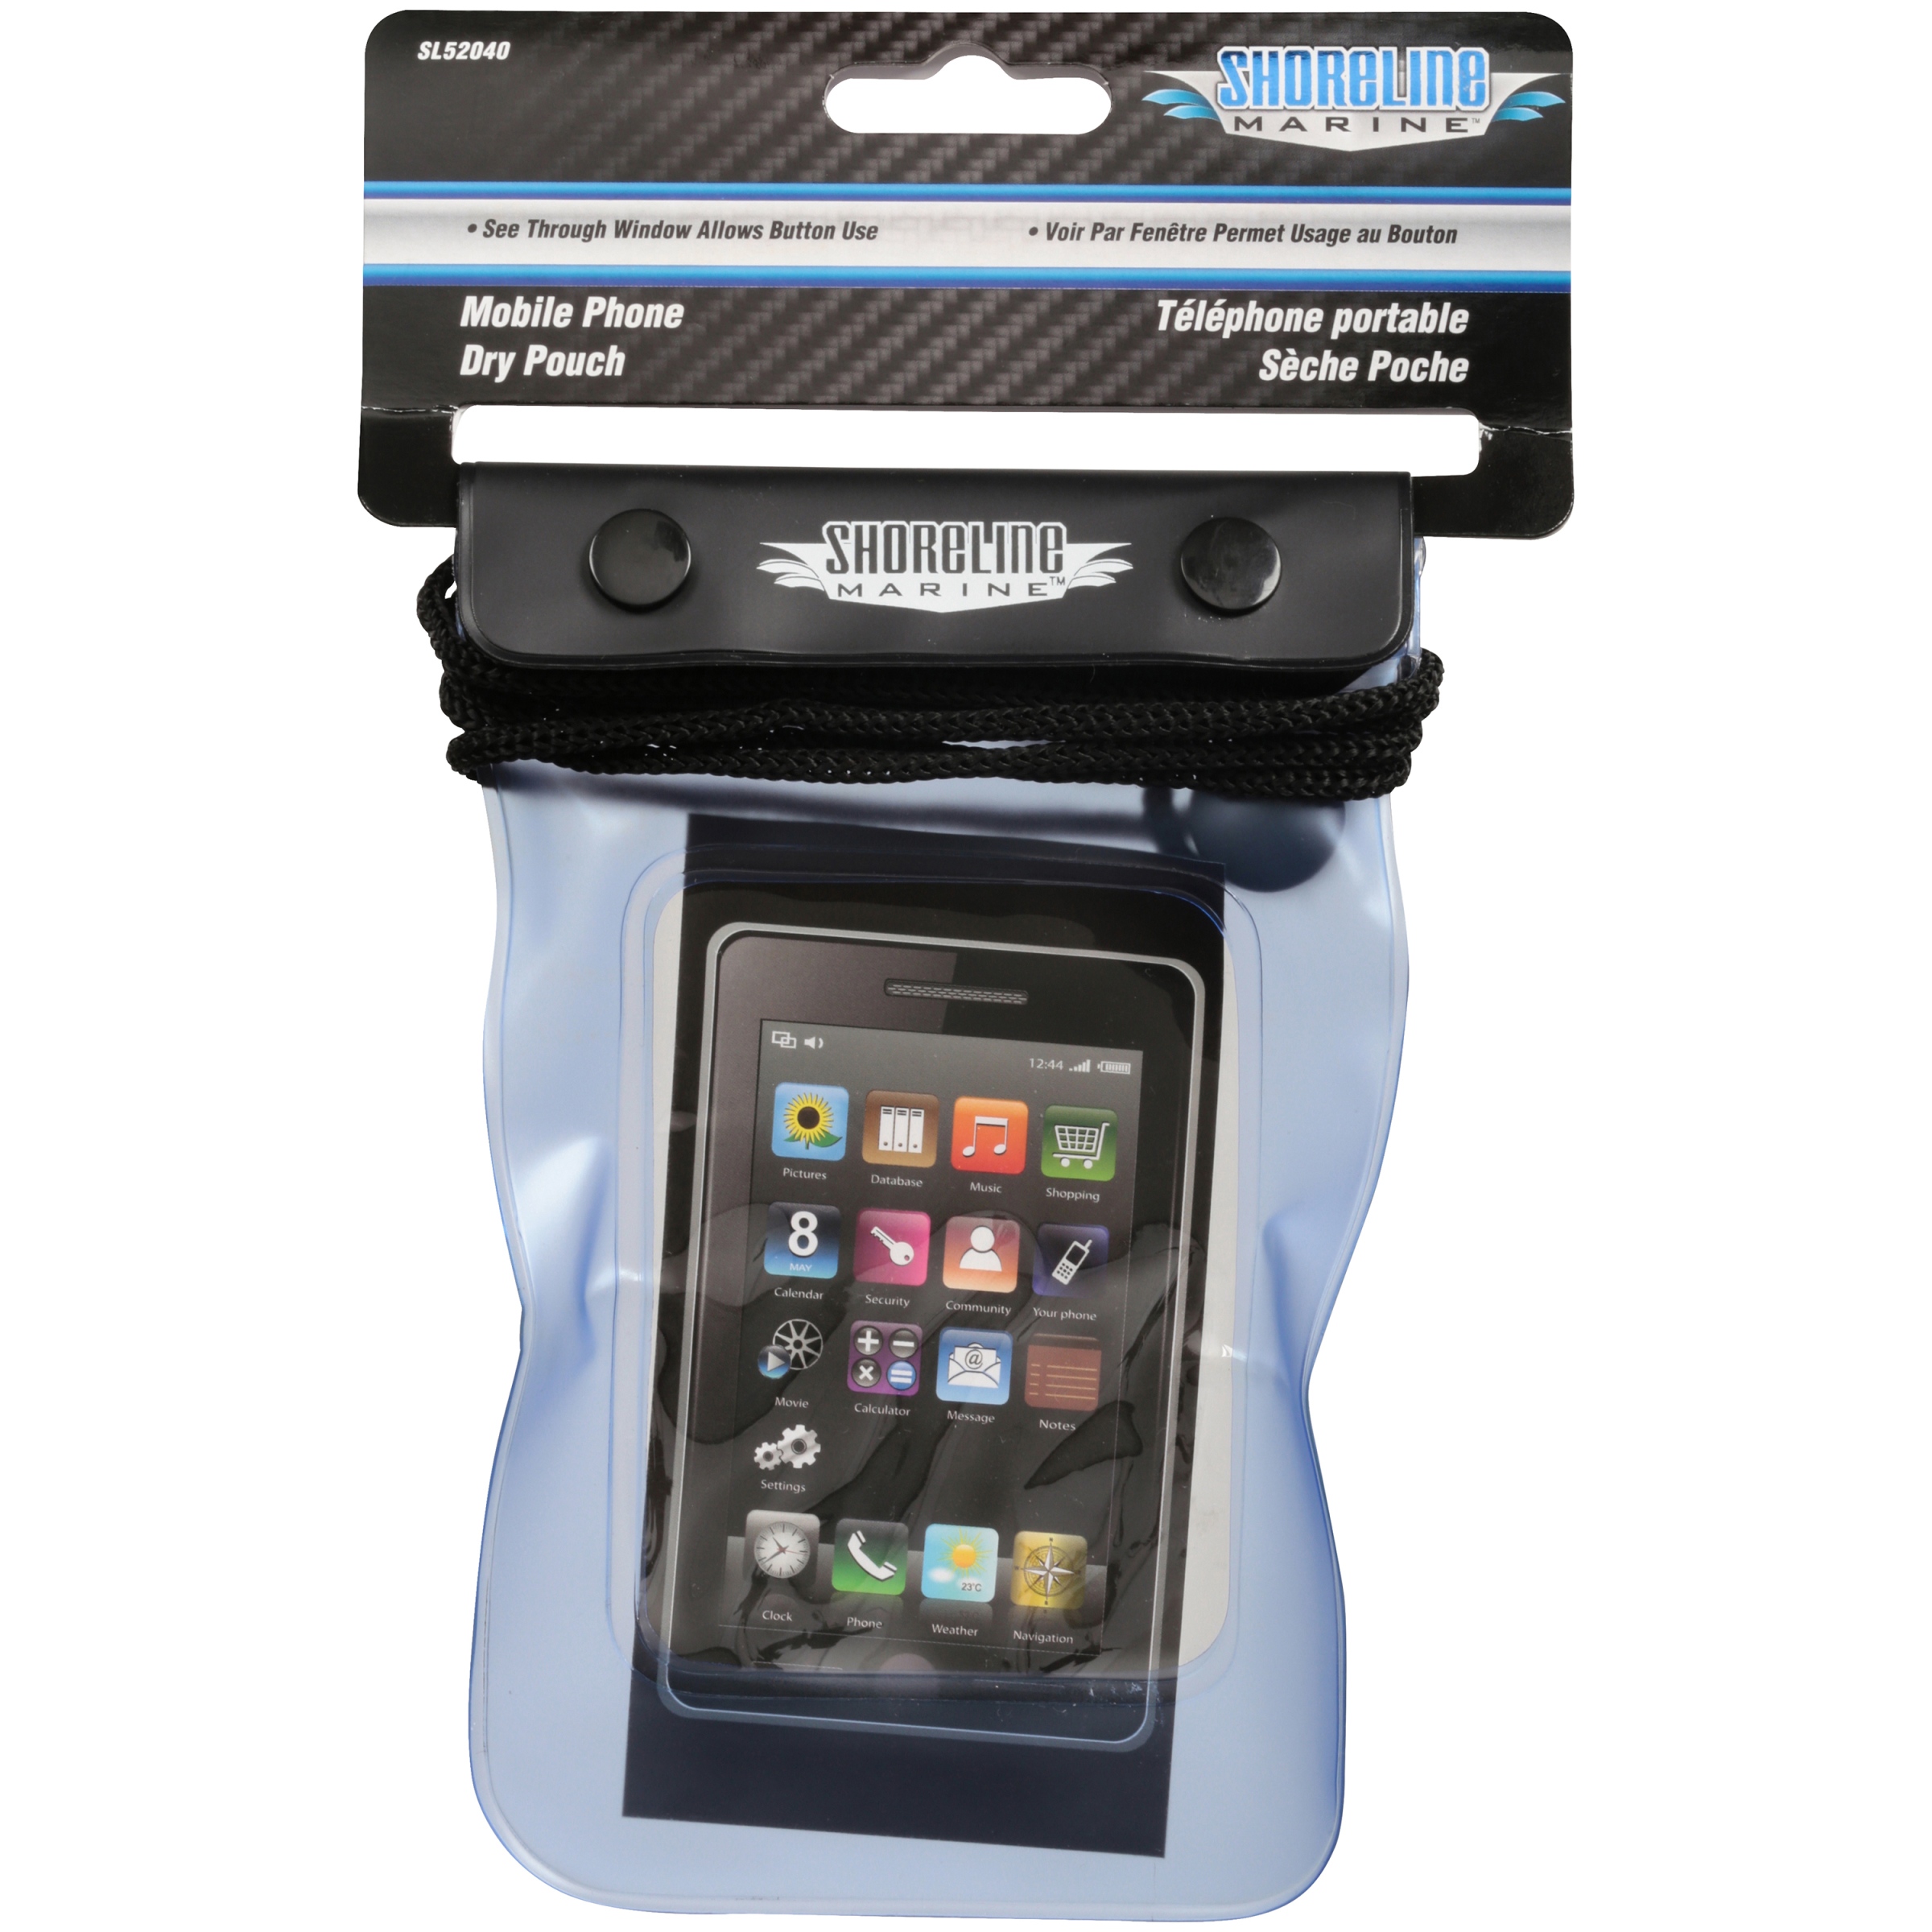 Shoreline Marine Waterproof Phone/Camera Dry Pouch, 4 2/5" x 6 2/5", Clear/Blue - image 3 of 4